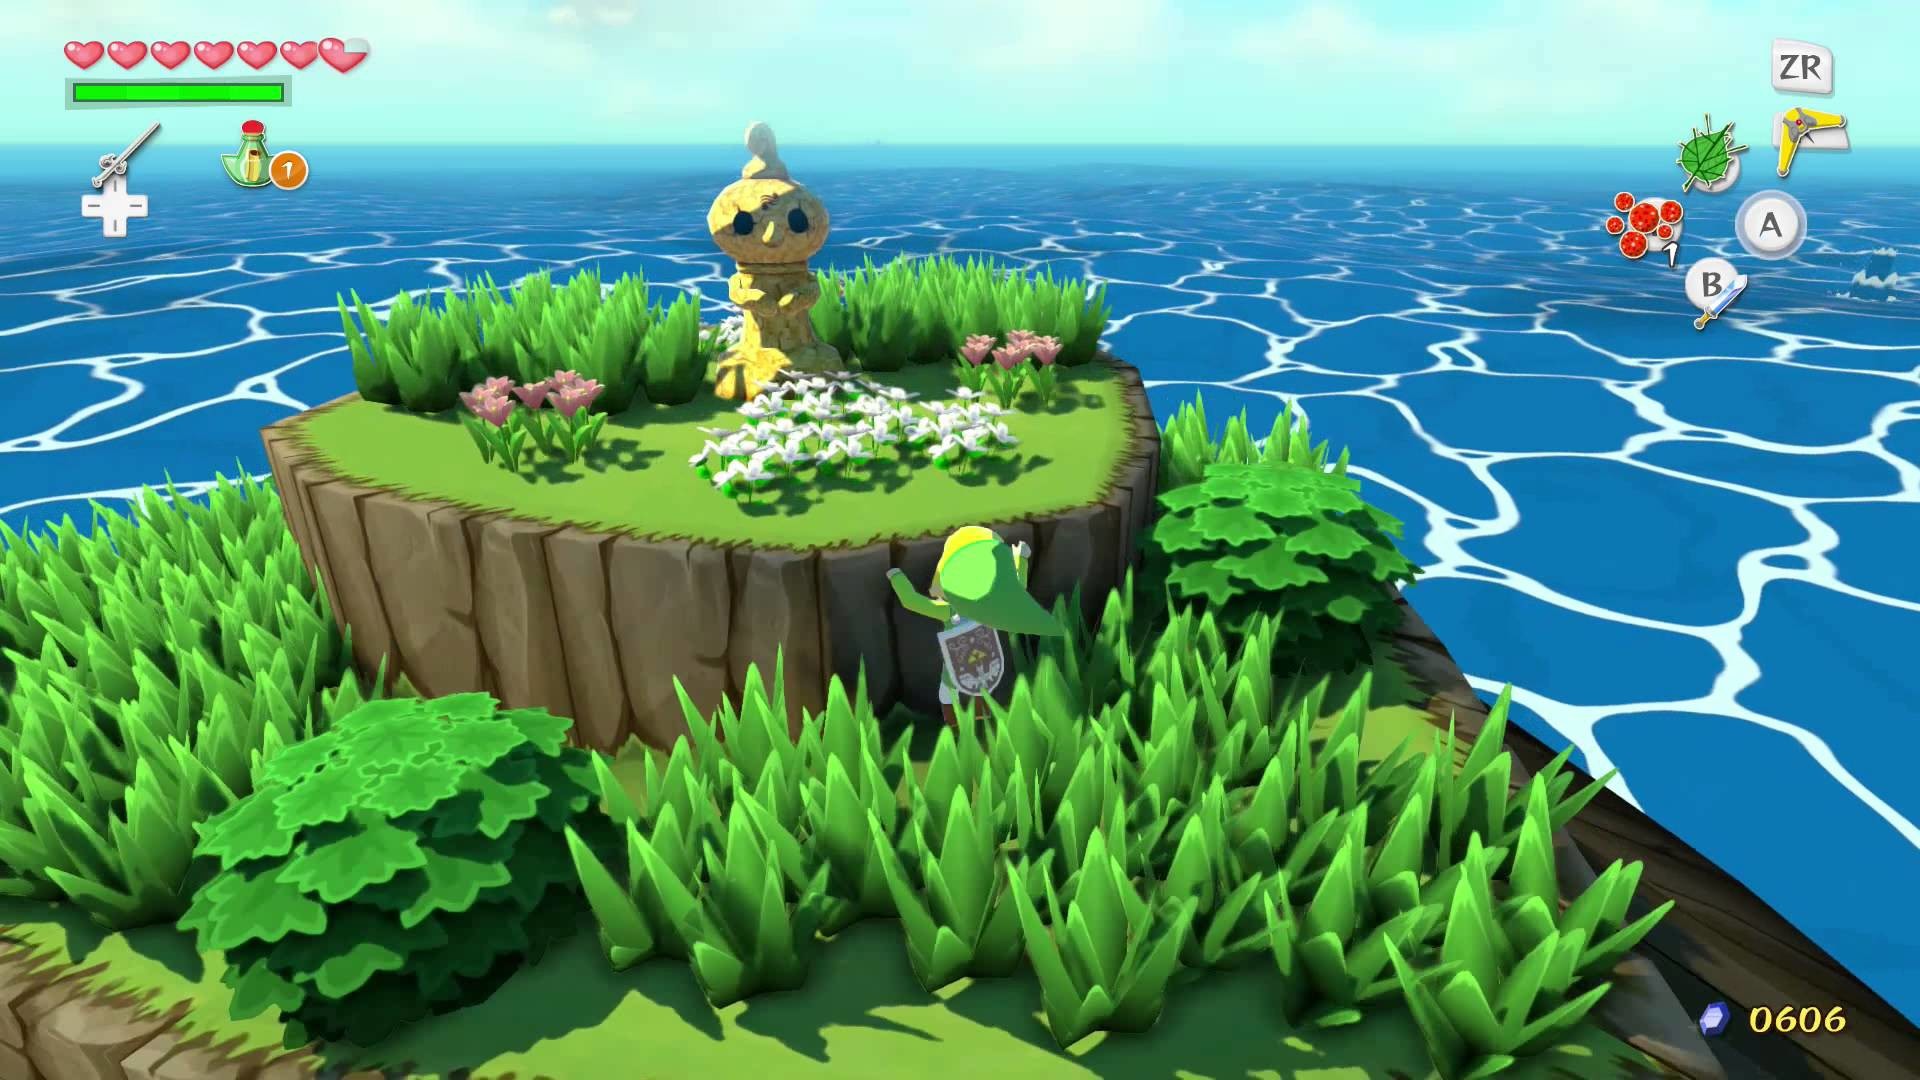 1920x1080 wind waker hd - Leaves with simple detail with only 3 shades of green and  same